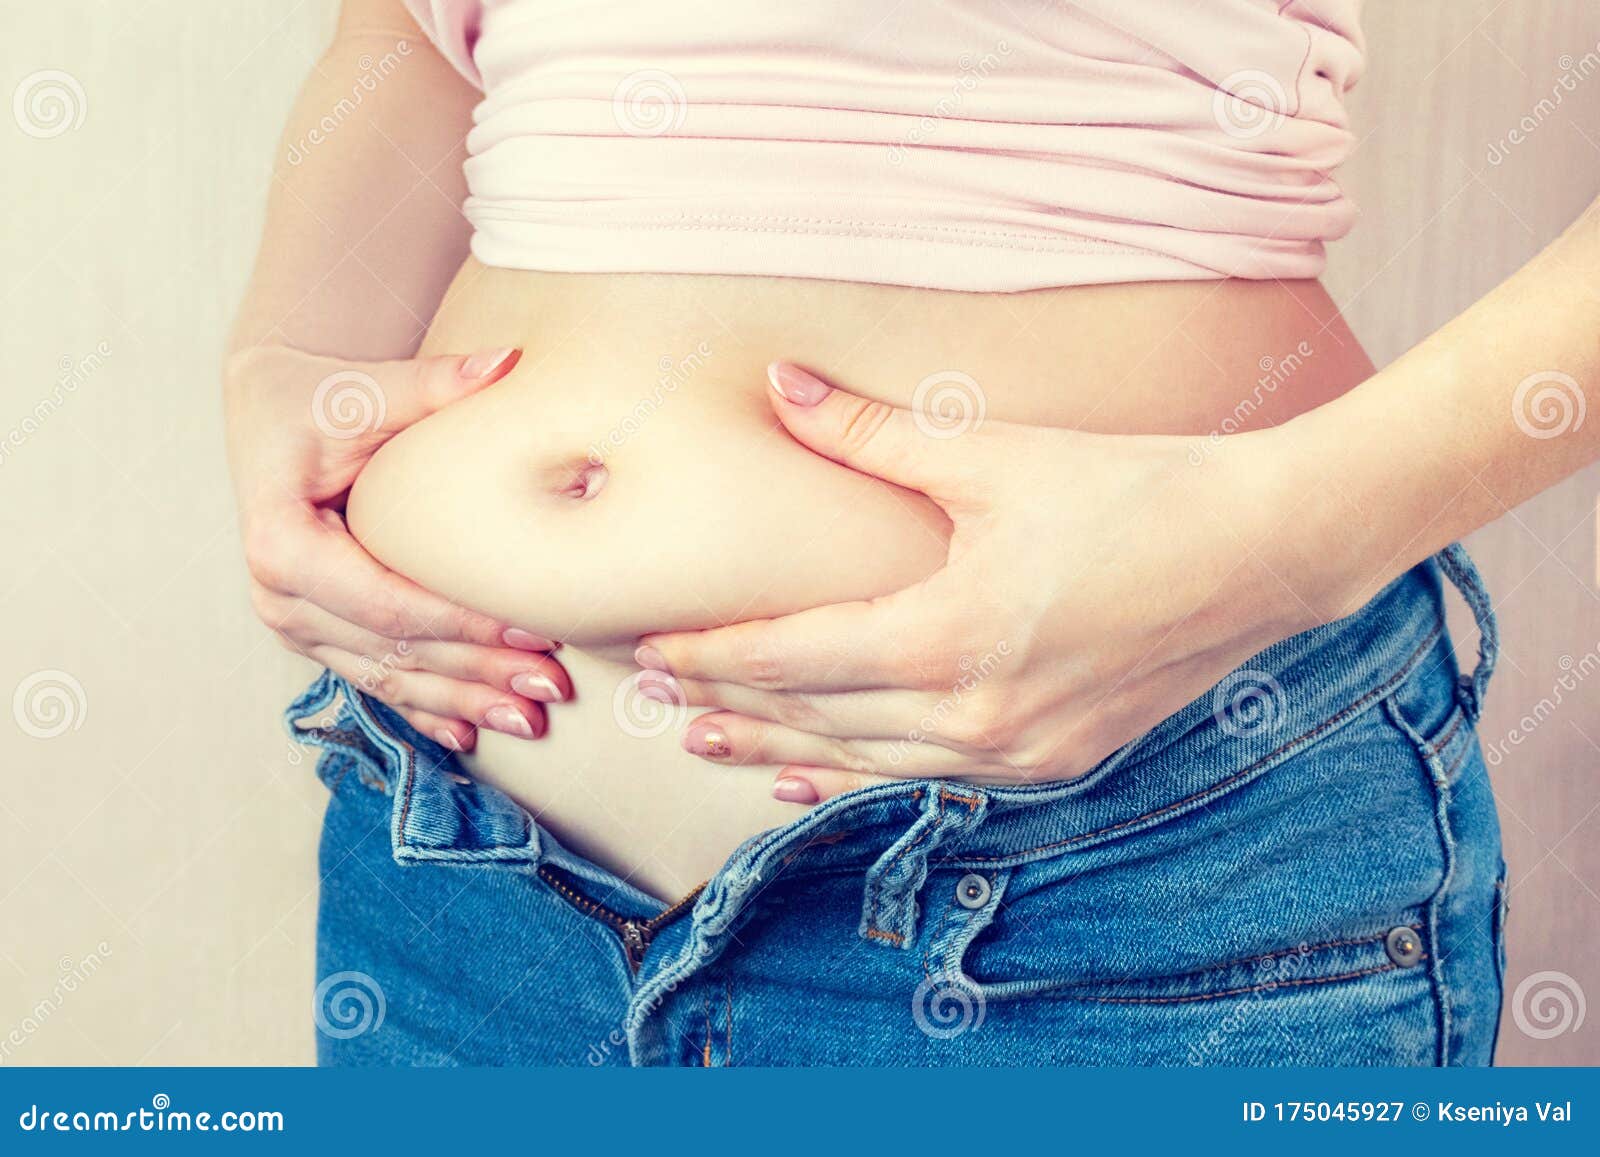 Girls With Cute Bellies